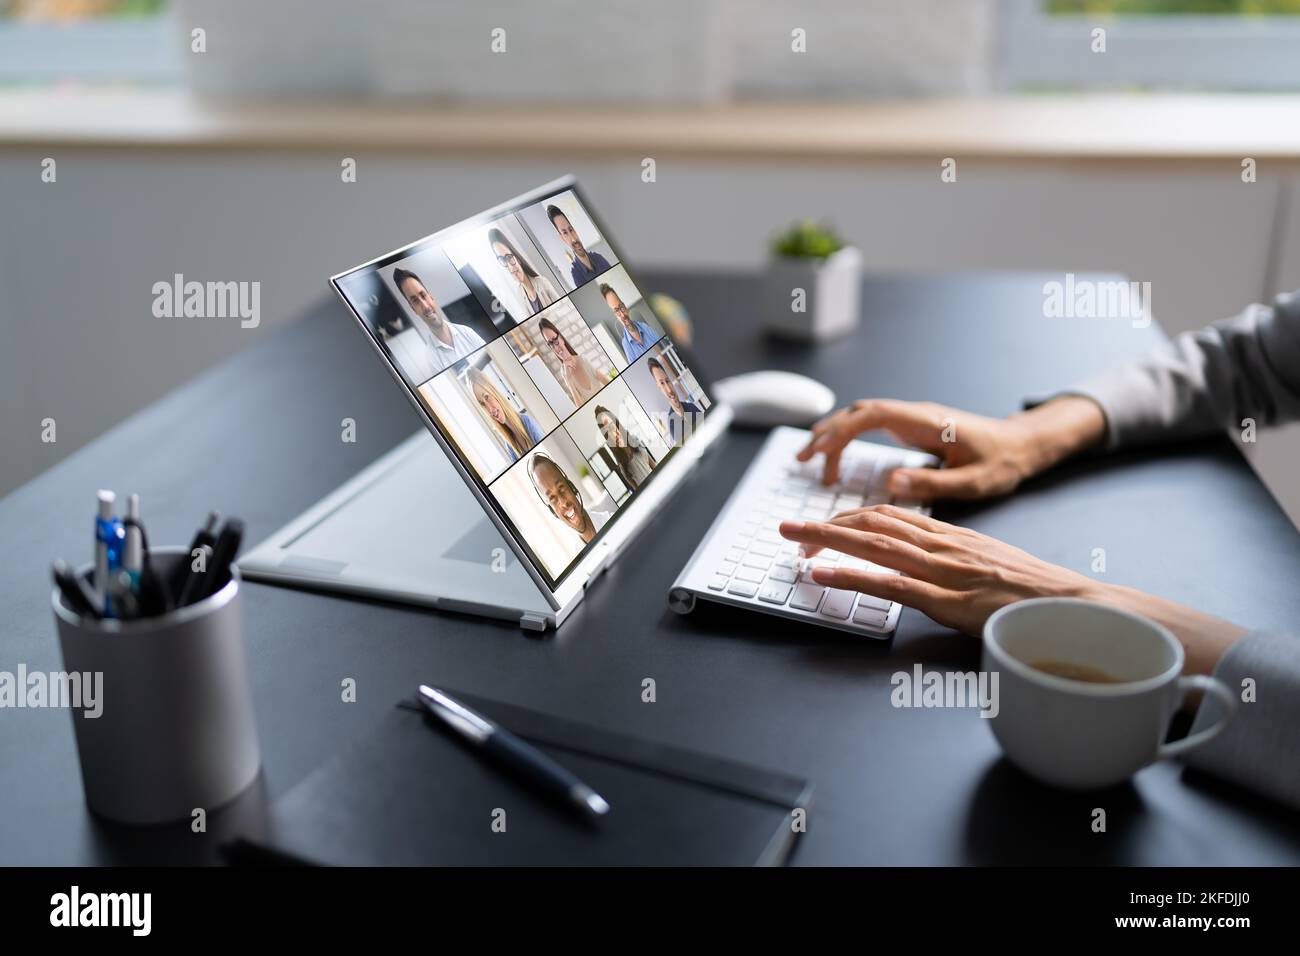 Online Remote Video Conference Webinar Meeting Call Stock Photo